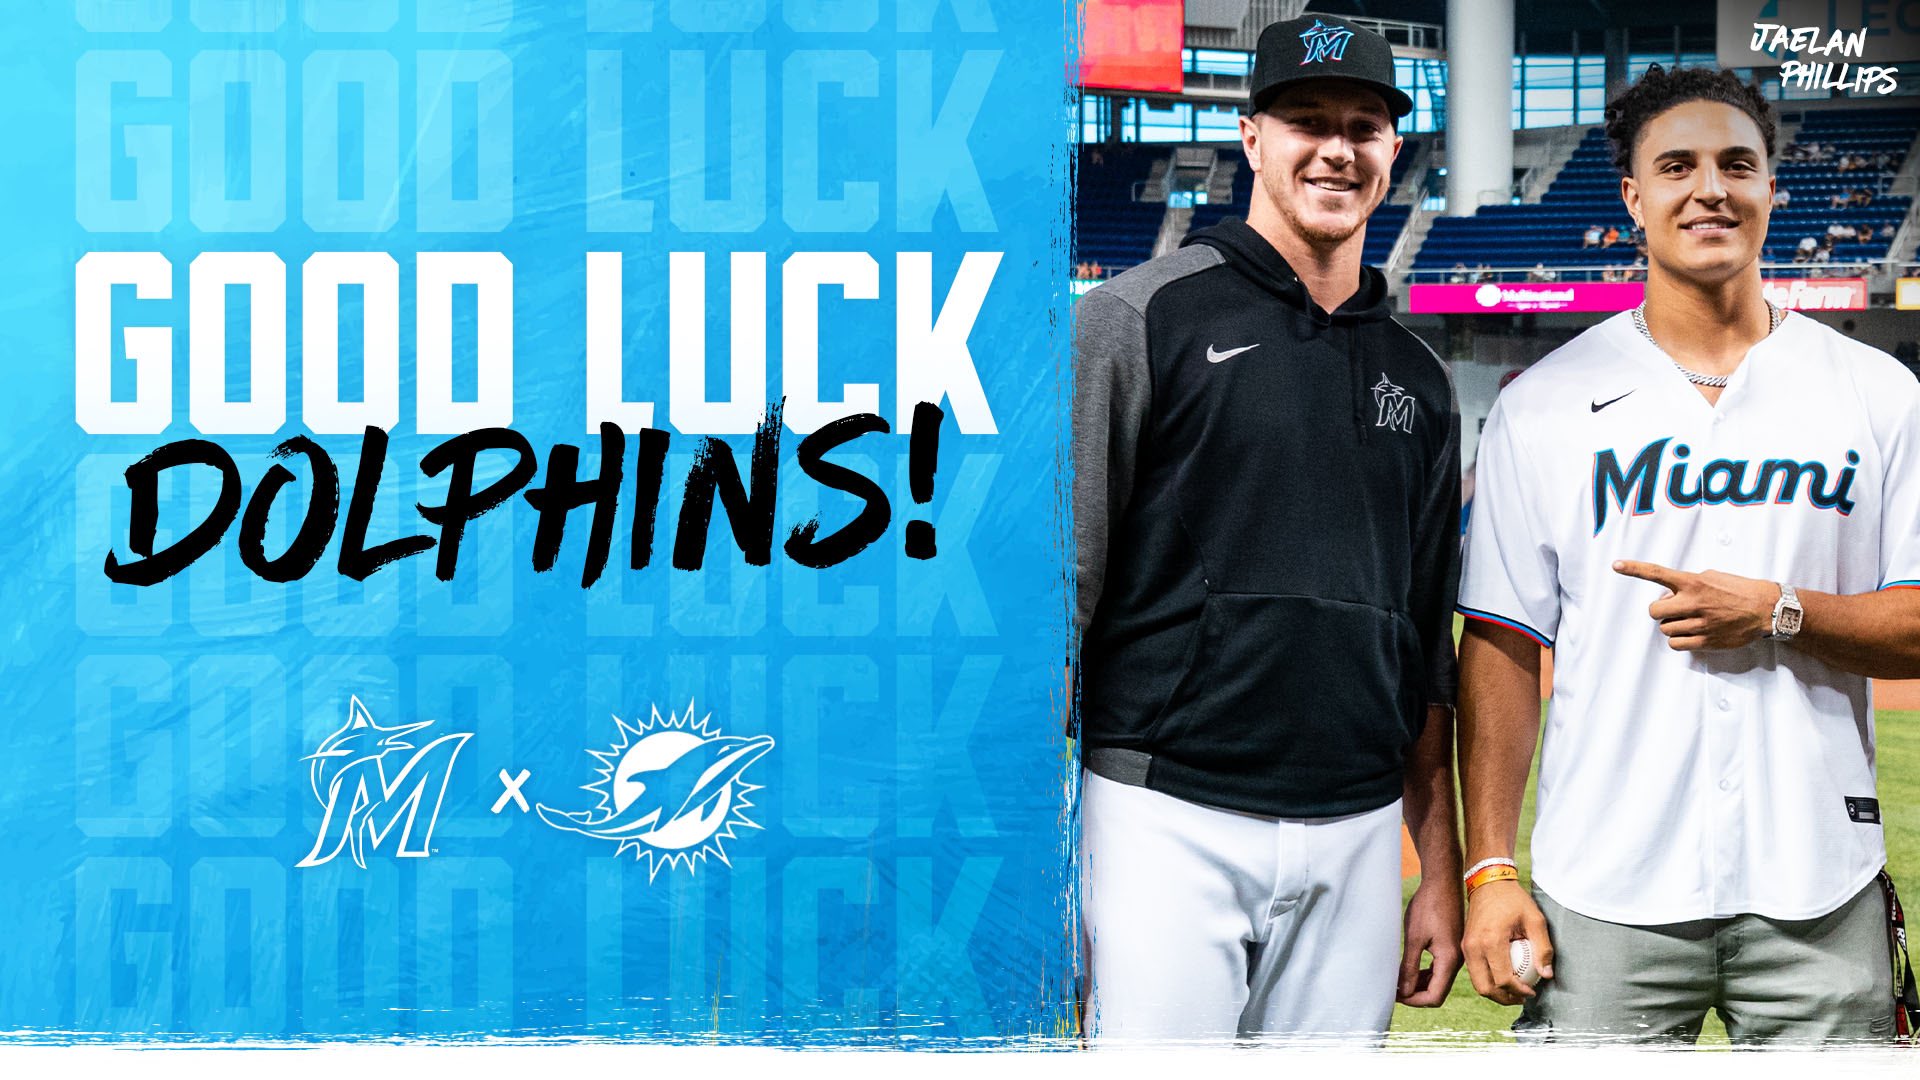 Miami Marlins on X: #FinsUp, Miami. Rooting for you all the way in ATL,  @MiamiDolphins!  / X